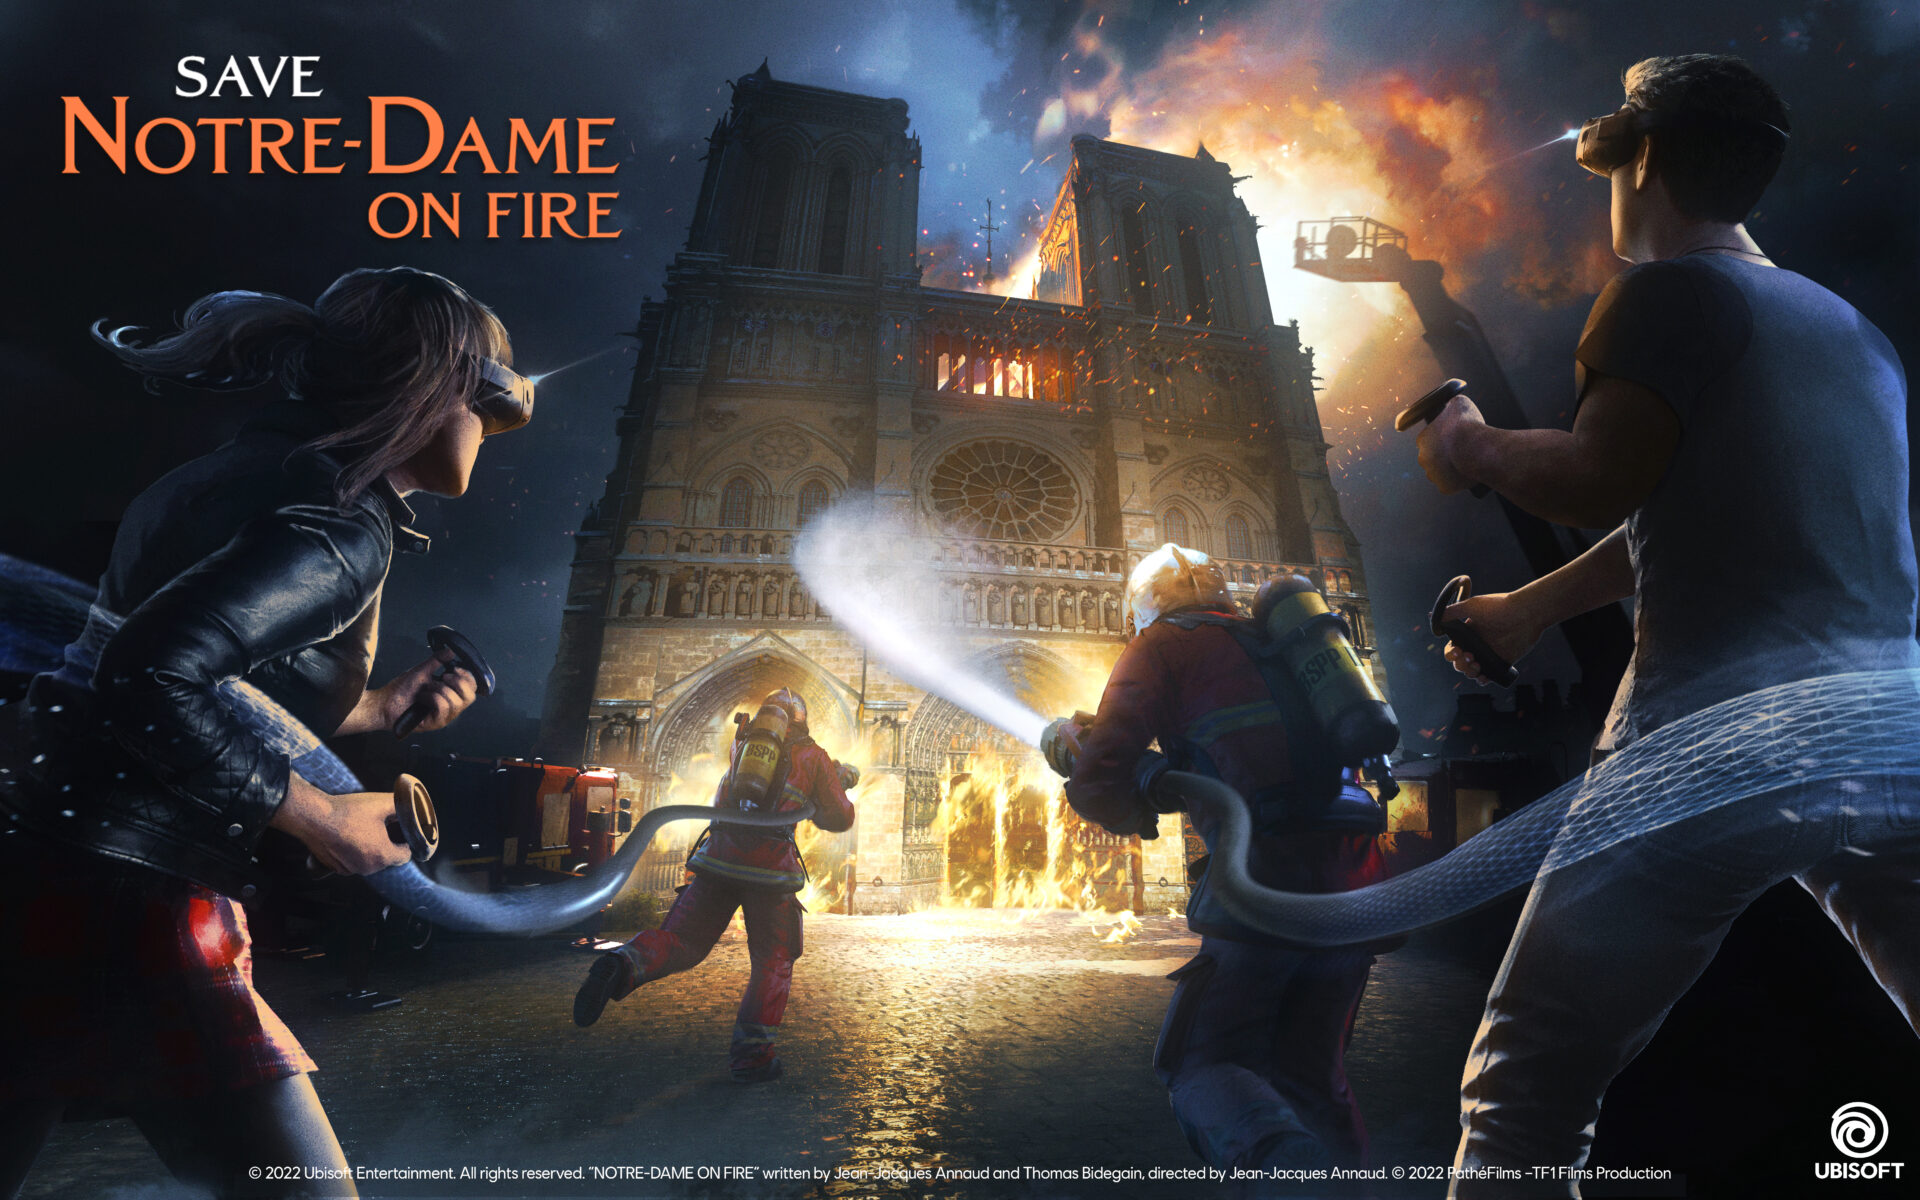 Experience the heroic rescue of the firefighters who saved Notre Dame de Paris